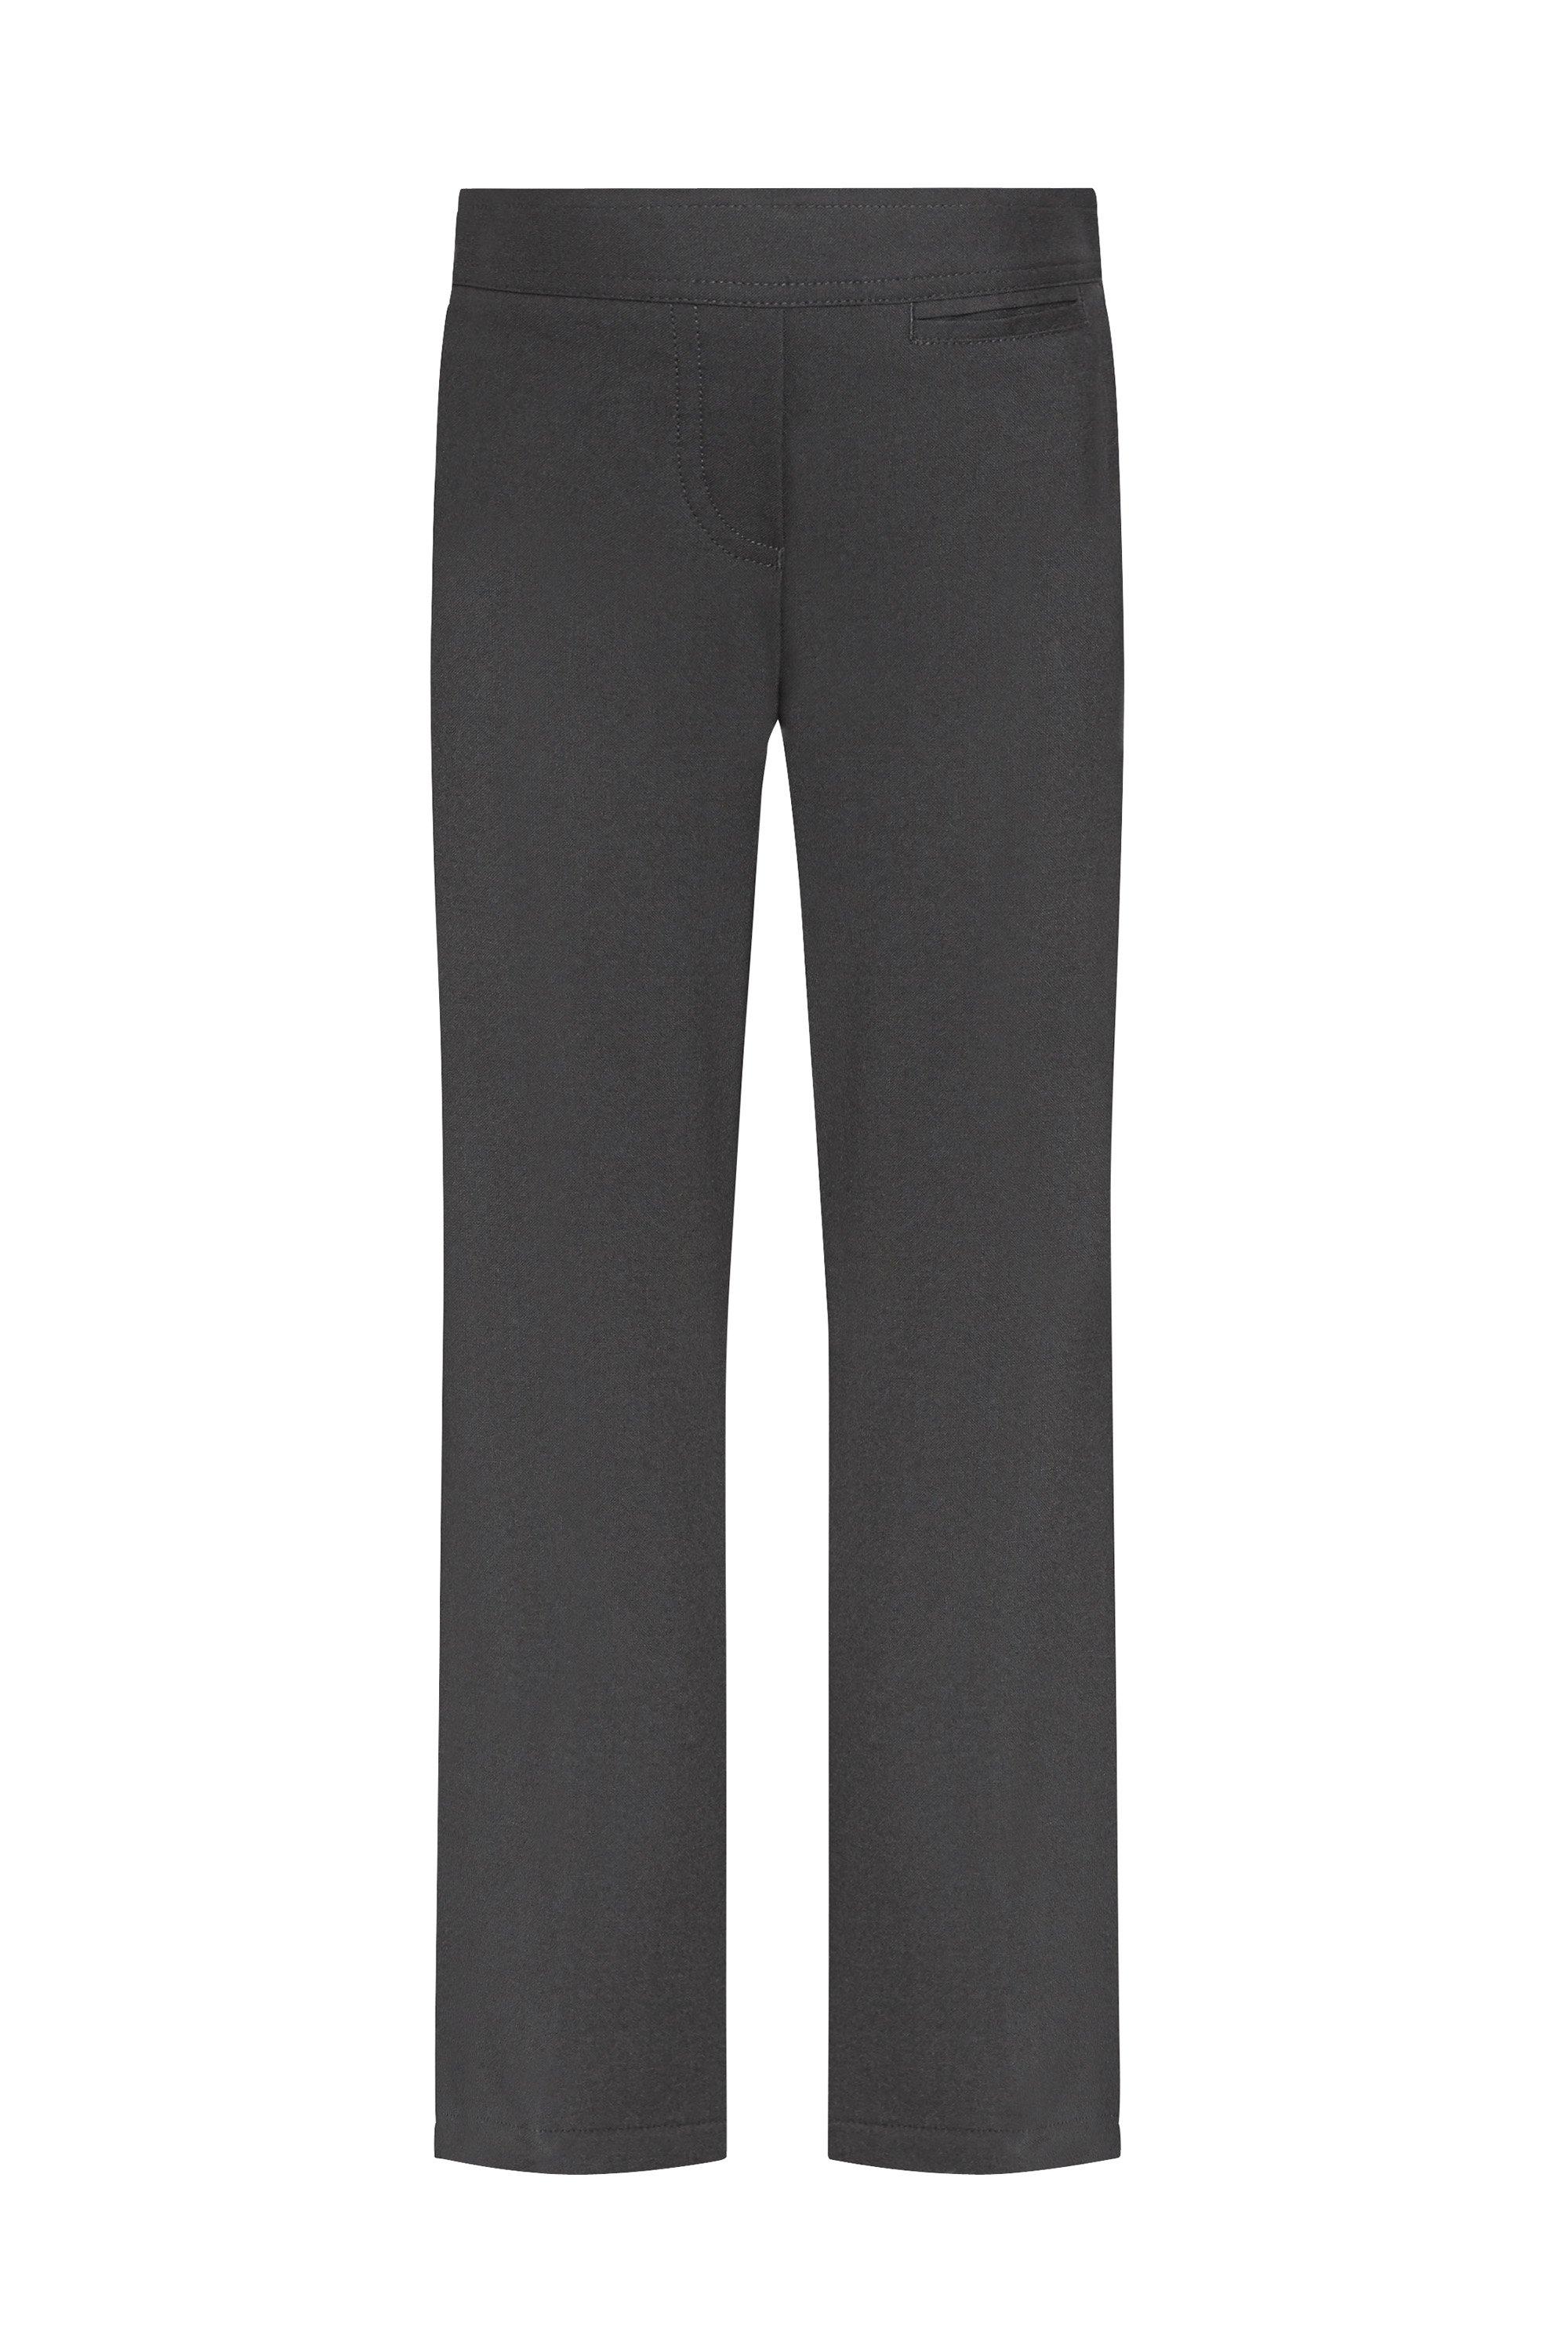 Easy Care Girls Regular Grey School Trousers 2 Pack | Woolworths.co.za